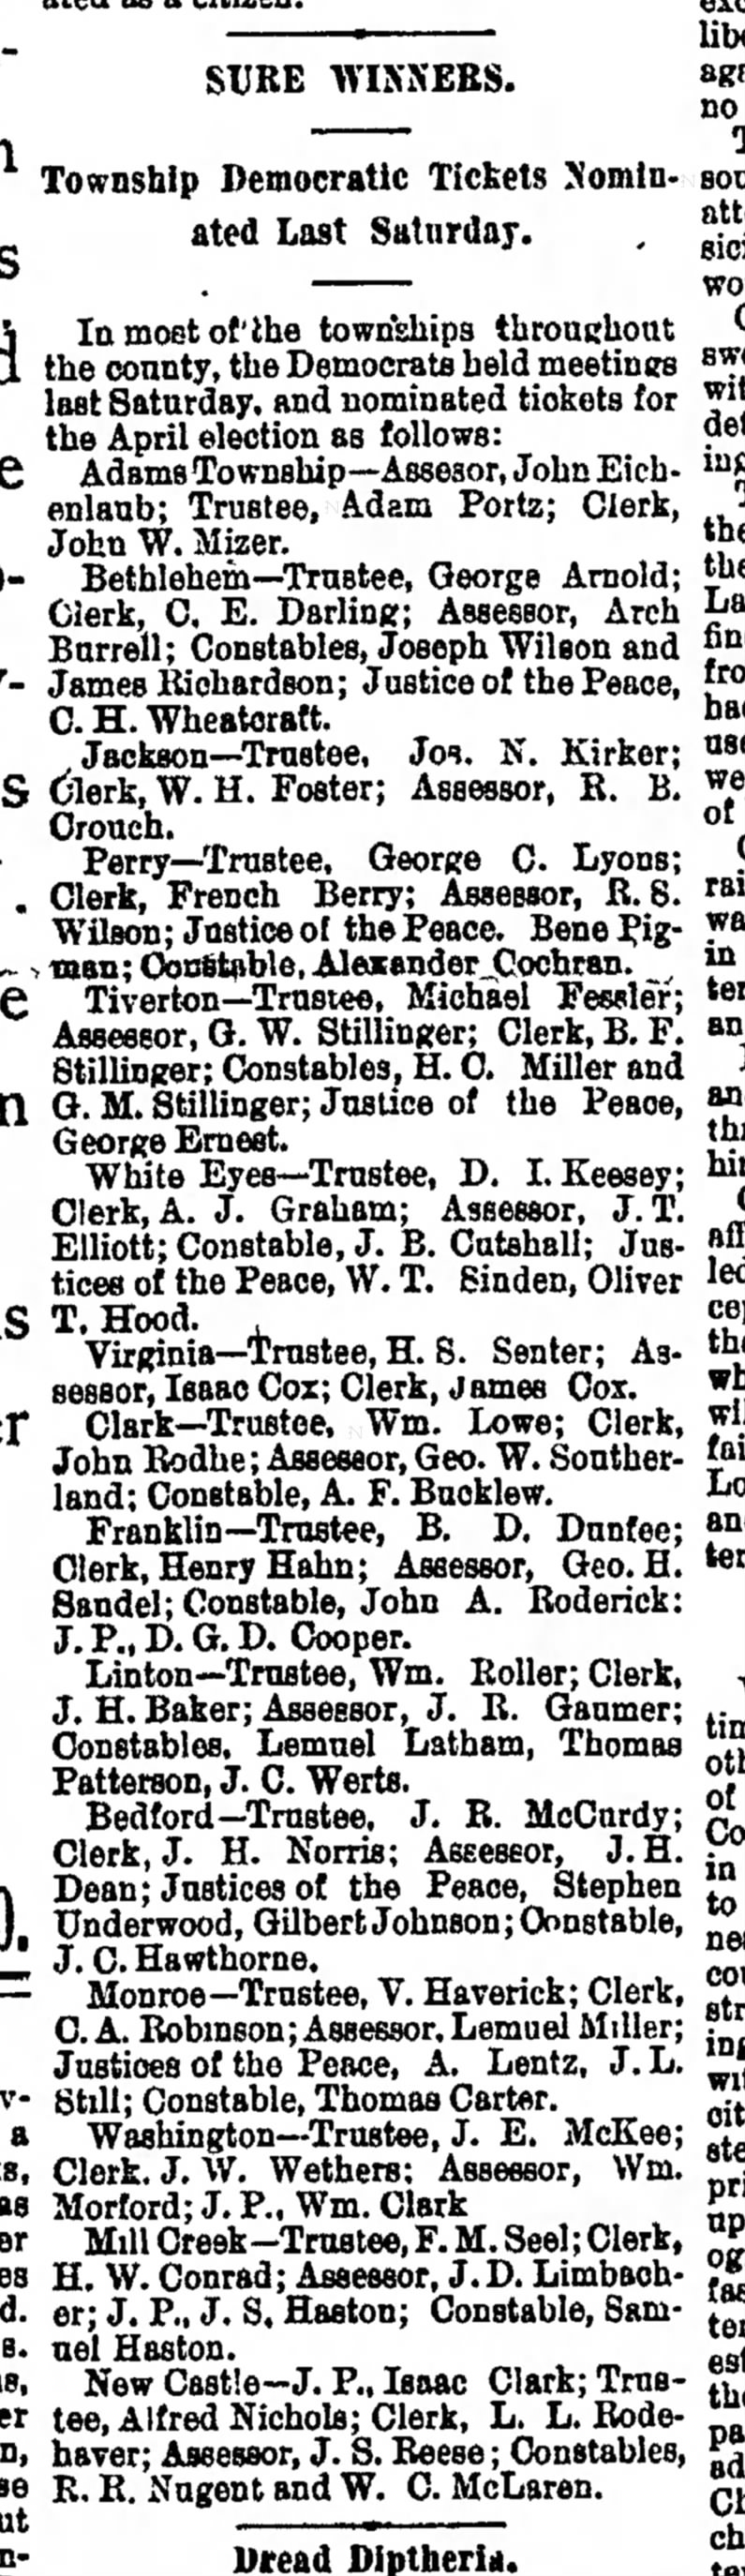 Justice of the Peace - William Thomas Sinden, The Democratic Standard, 16 Mar 1894, p. 1